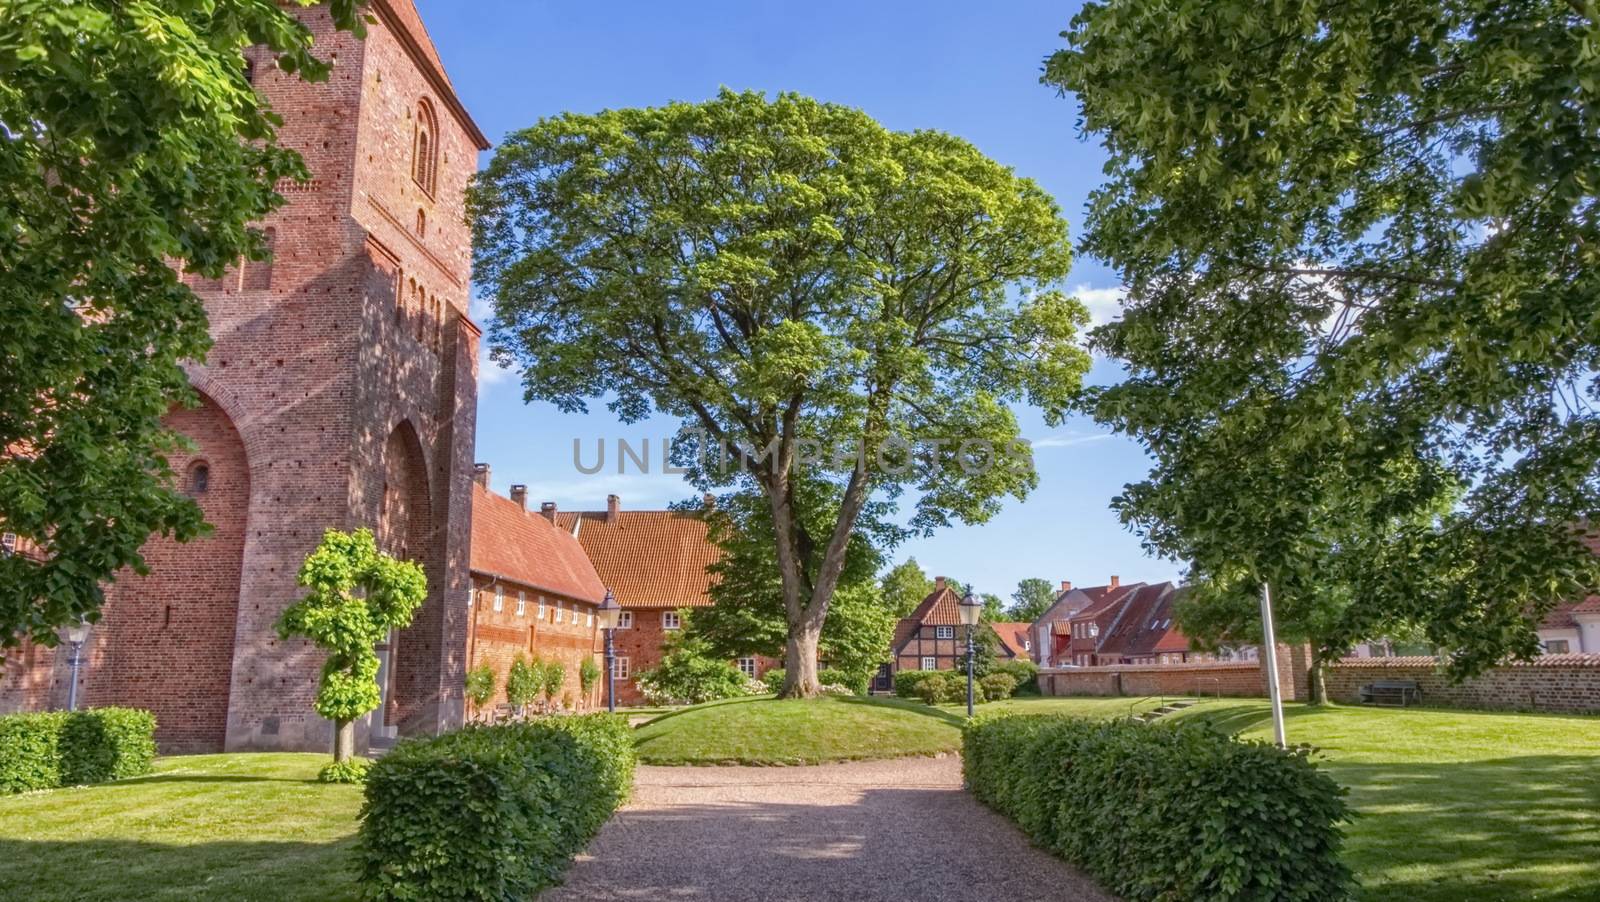 Saint Catherine's Dominican Priory and square in Ribe, Denmark